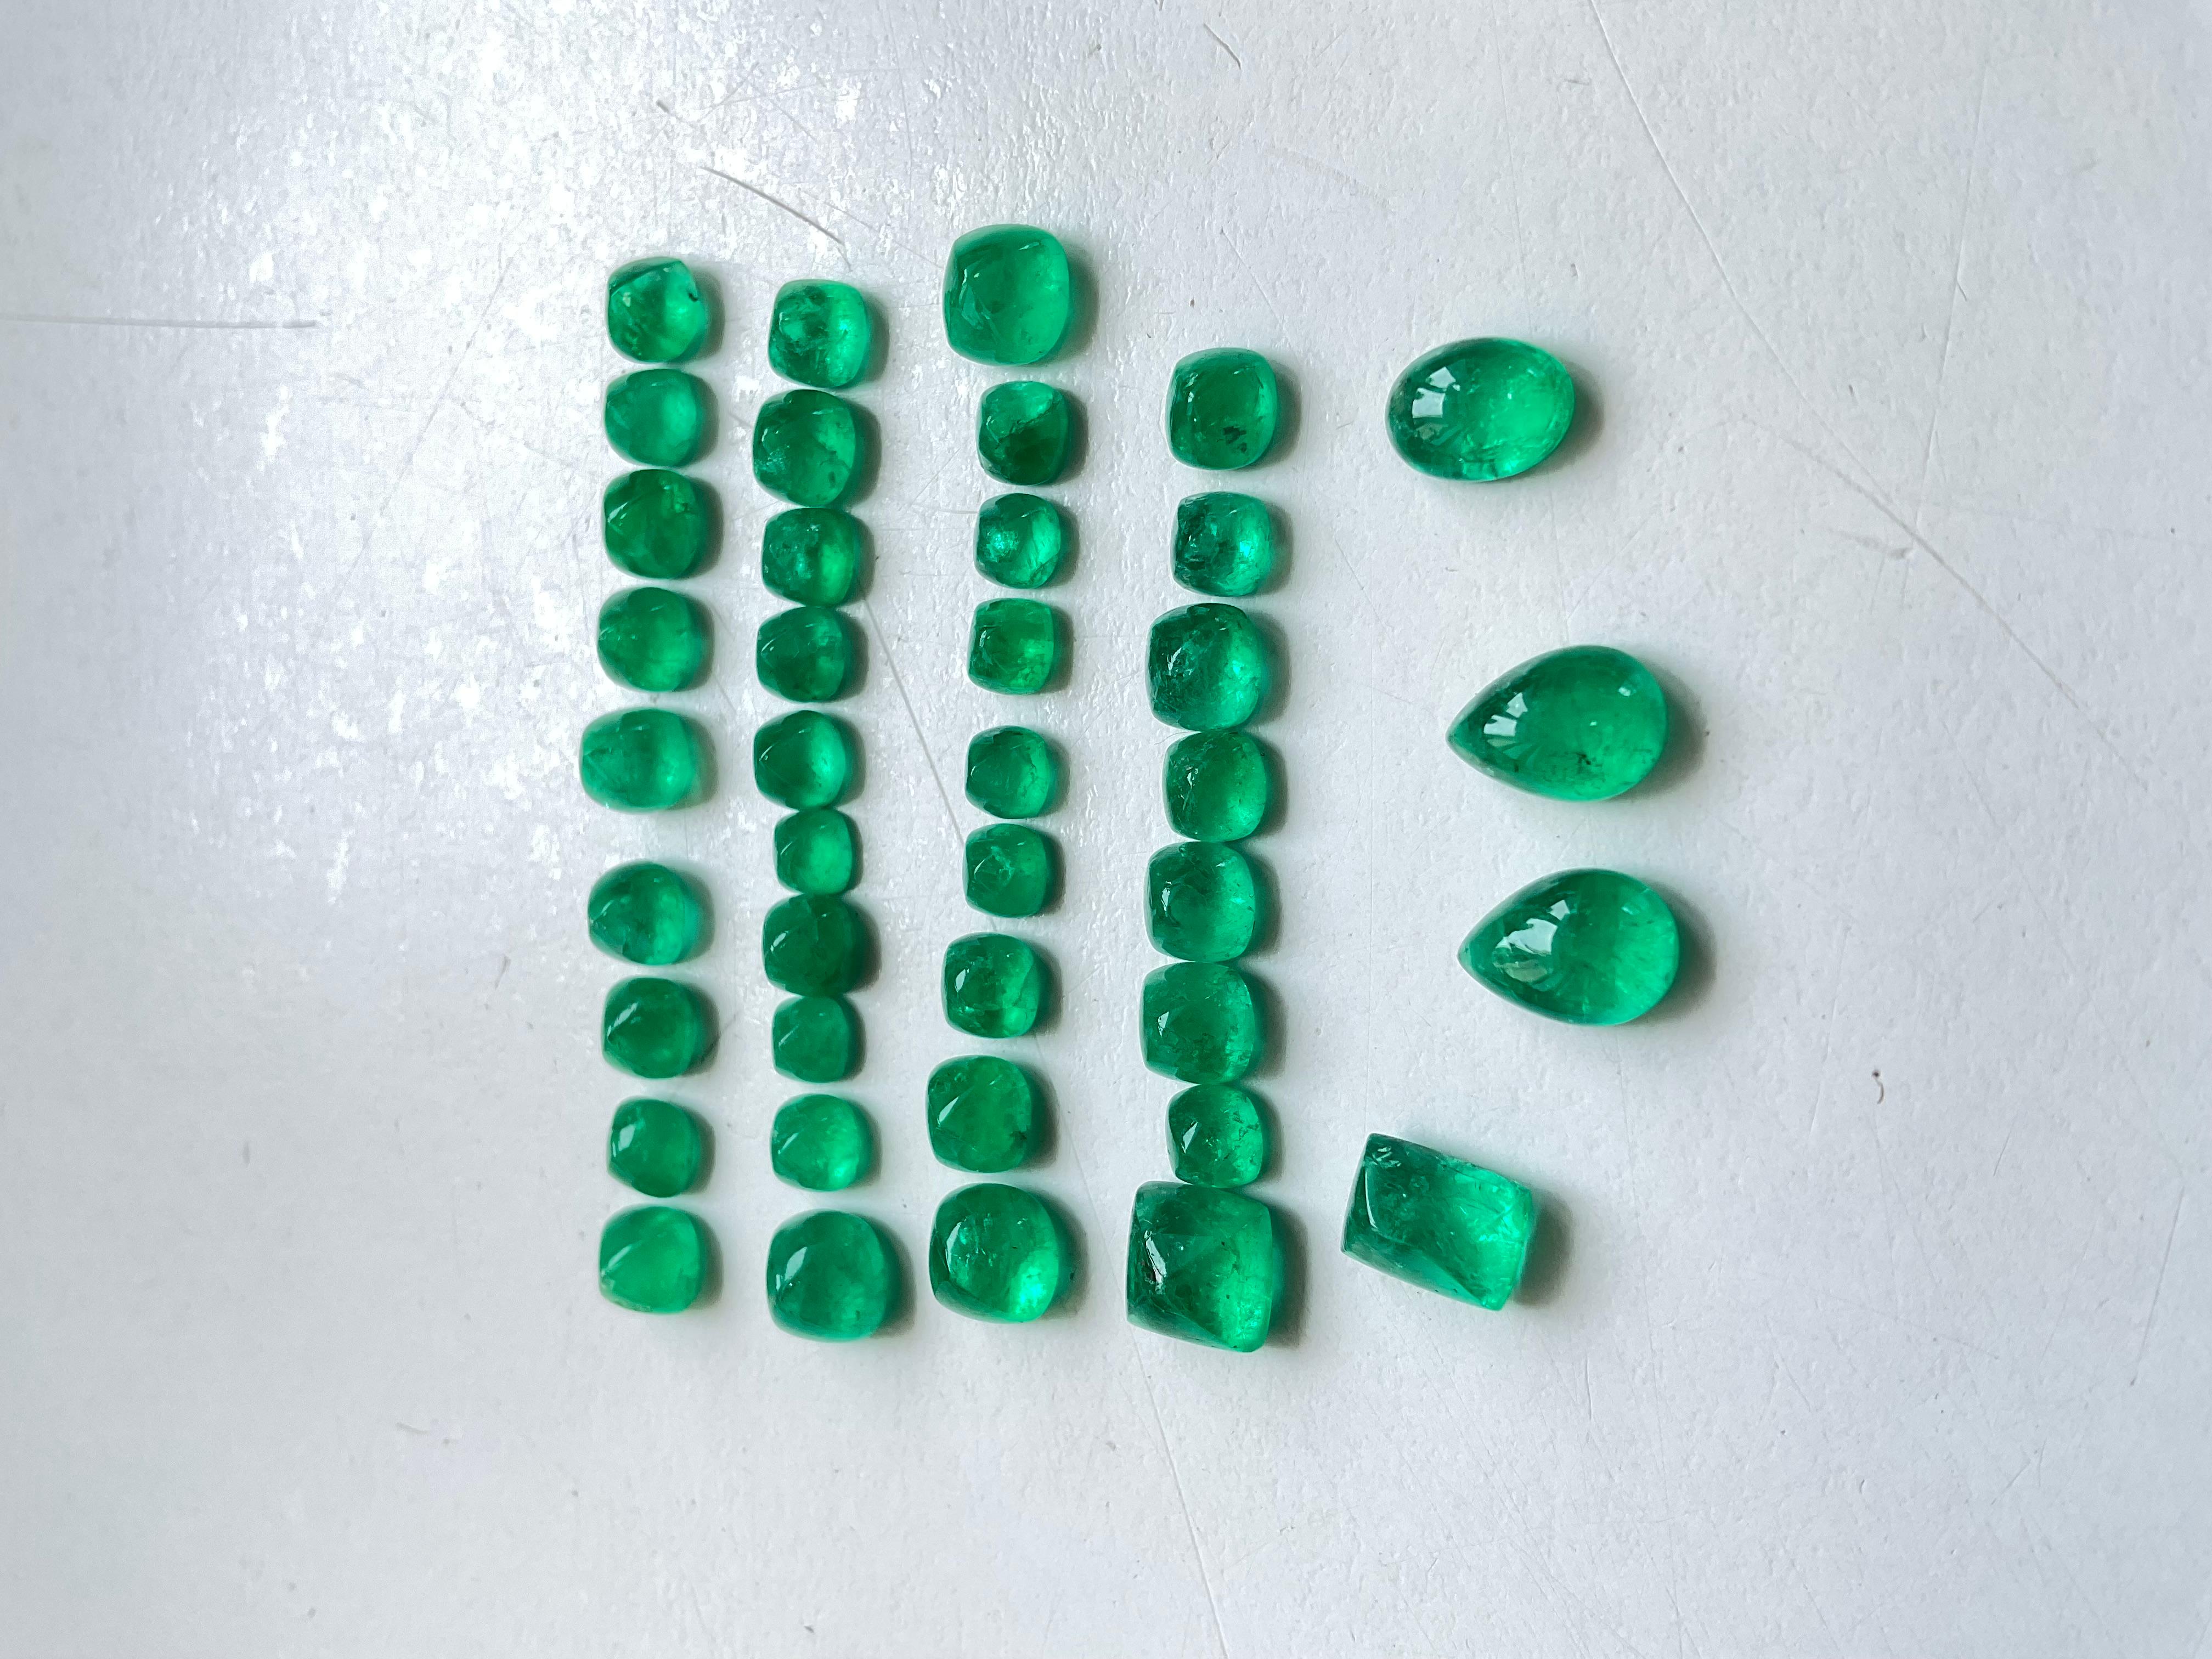 Sugarloaf Cabochon Colombian Emerald Sugarloaf Ovals Mix Shape Cabochon Loose Gemstone for Jewelry